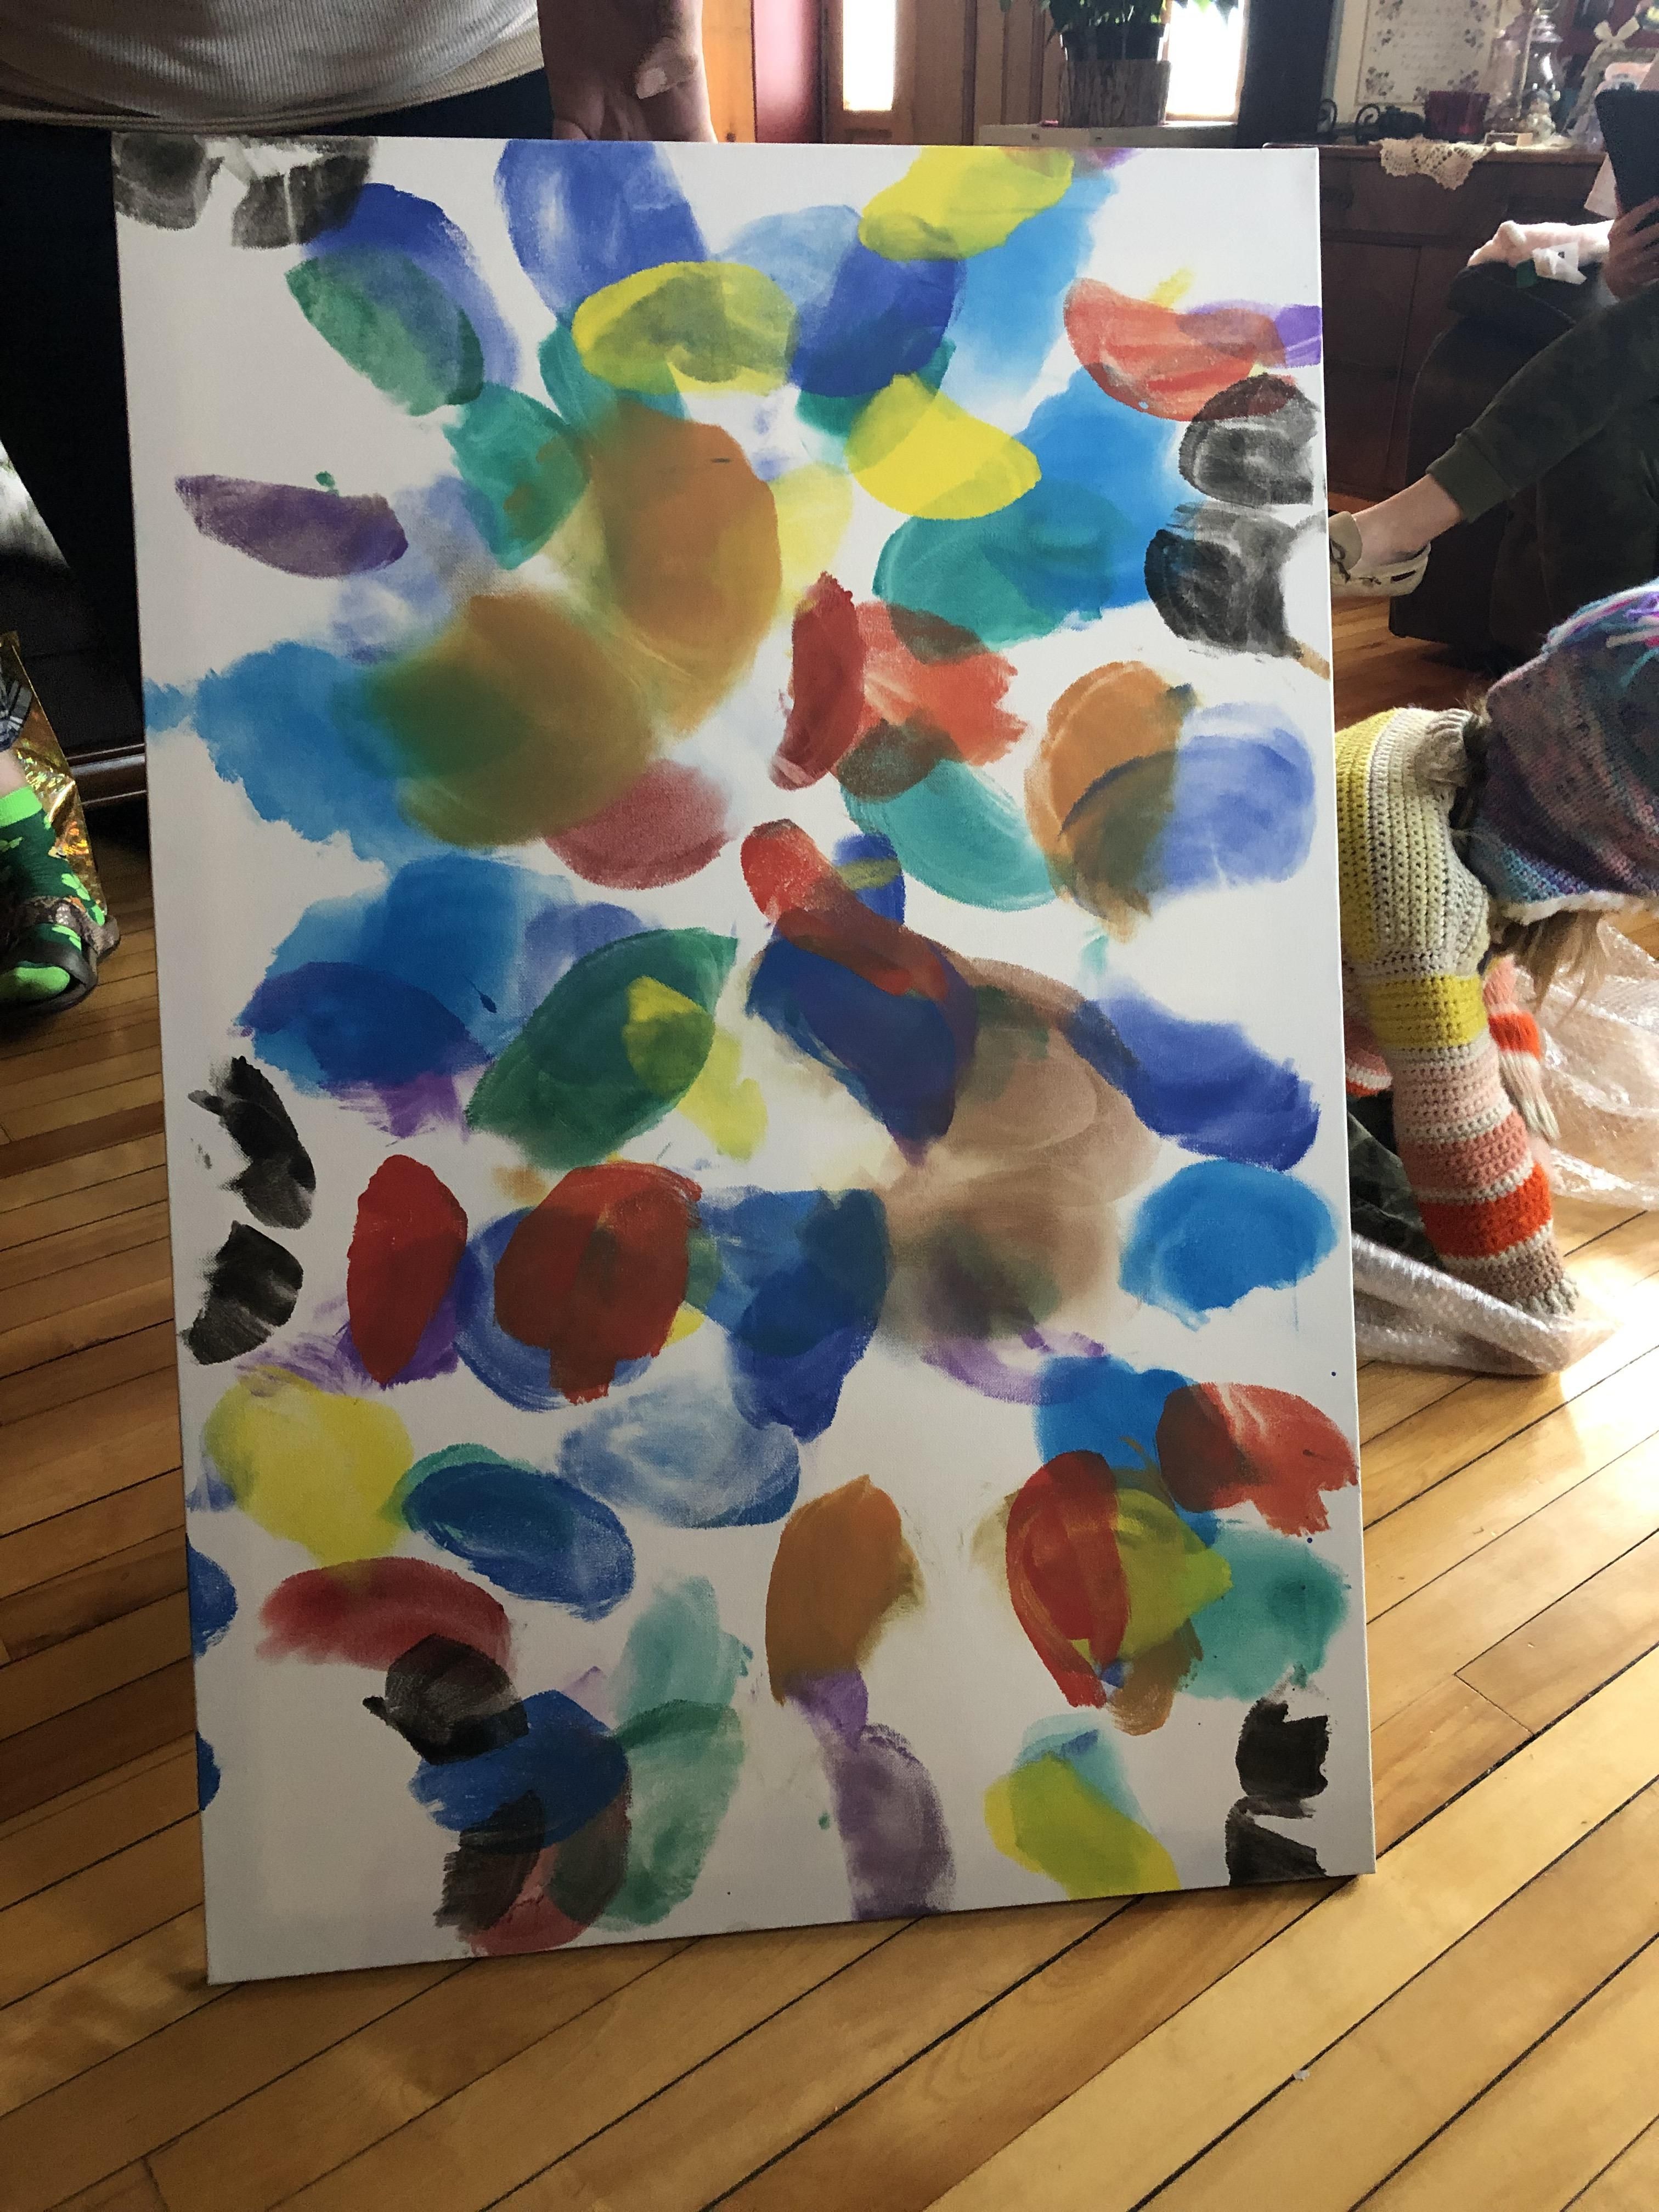 I asked for art for my new apartment this Christmas. May I present “butterflies”, a painting from my nieces made entirely with their butt cheeks. Lovely.